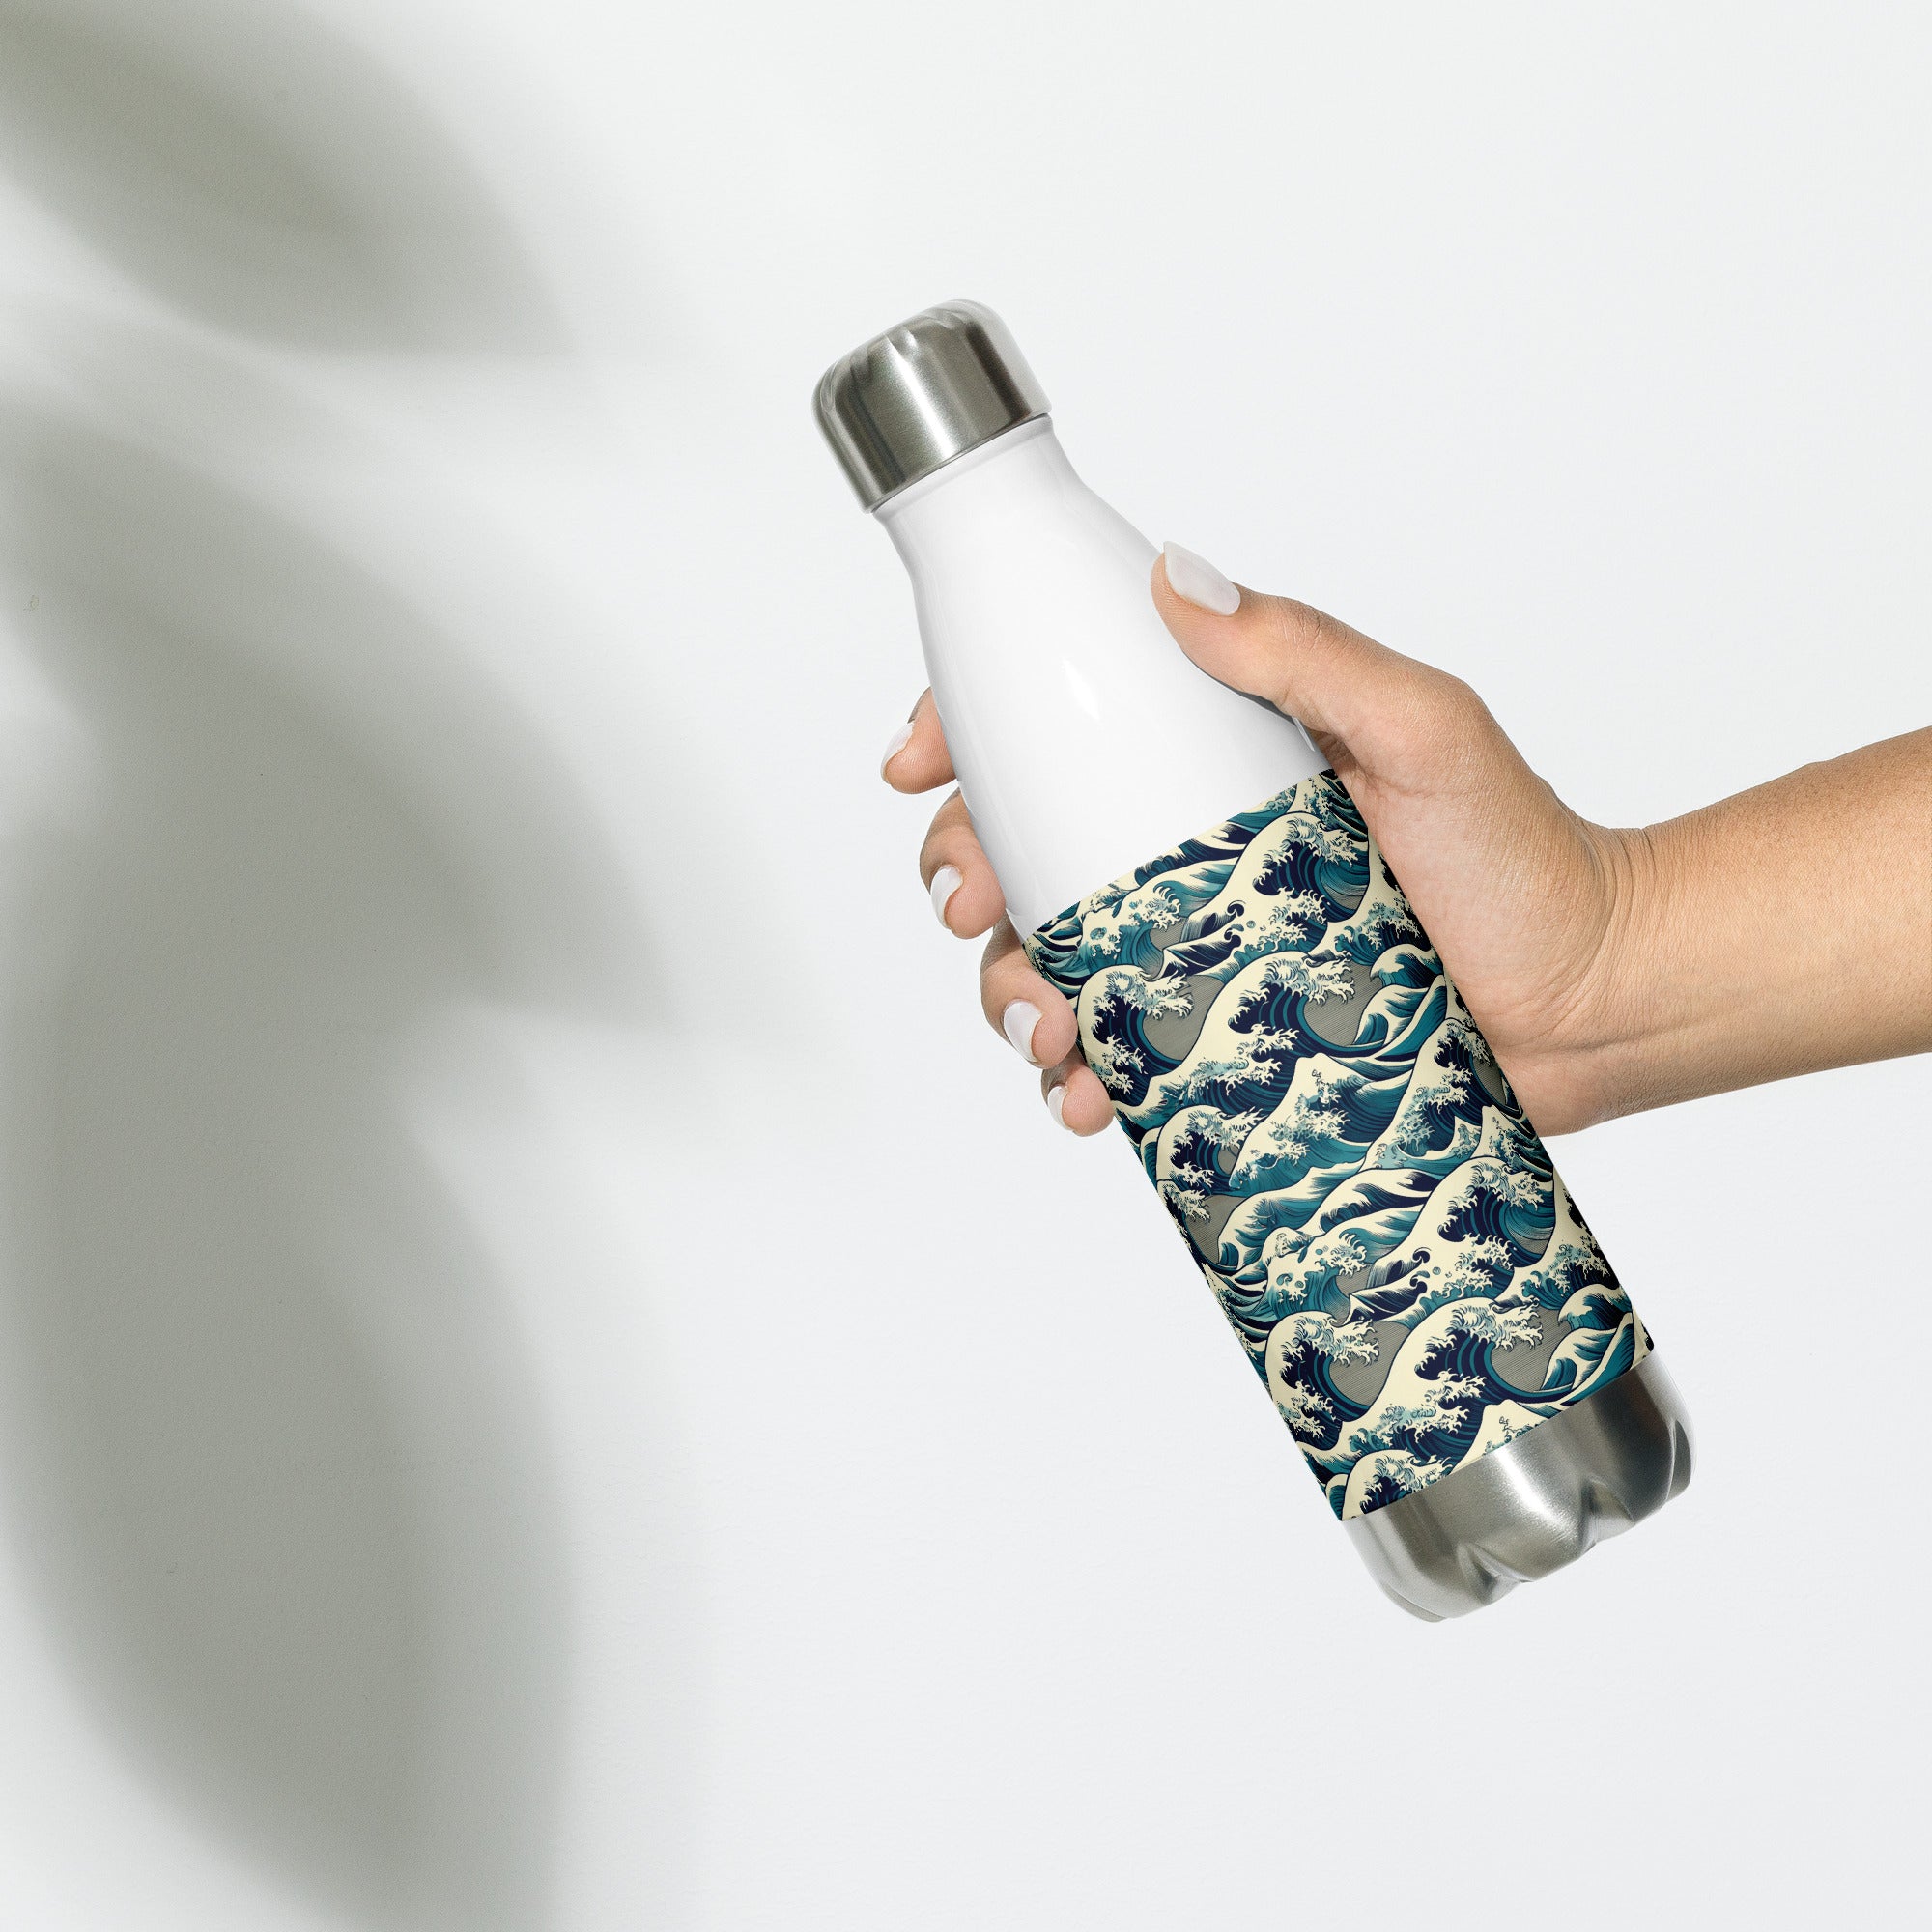 Hokusai 'The Great Wave off Kanagawa' Famous Painting Water Bottle | Stainless Steel Art Water Bottle